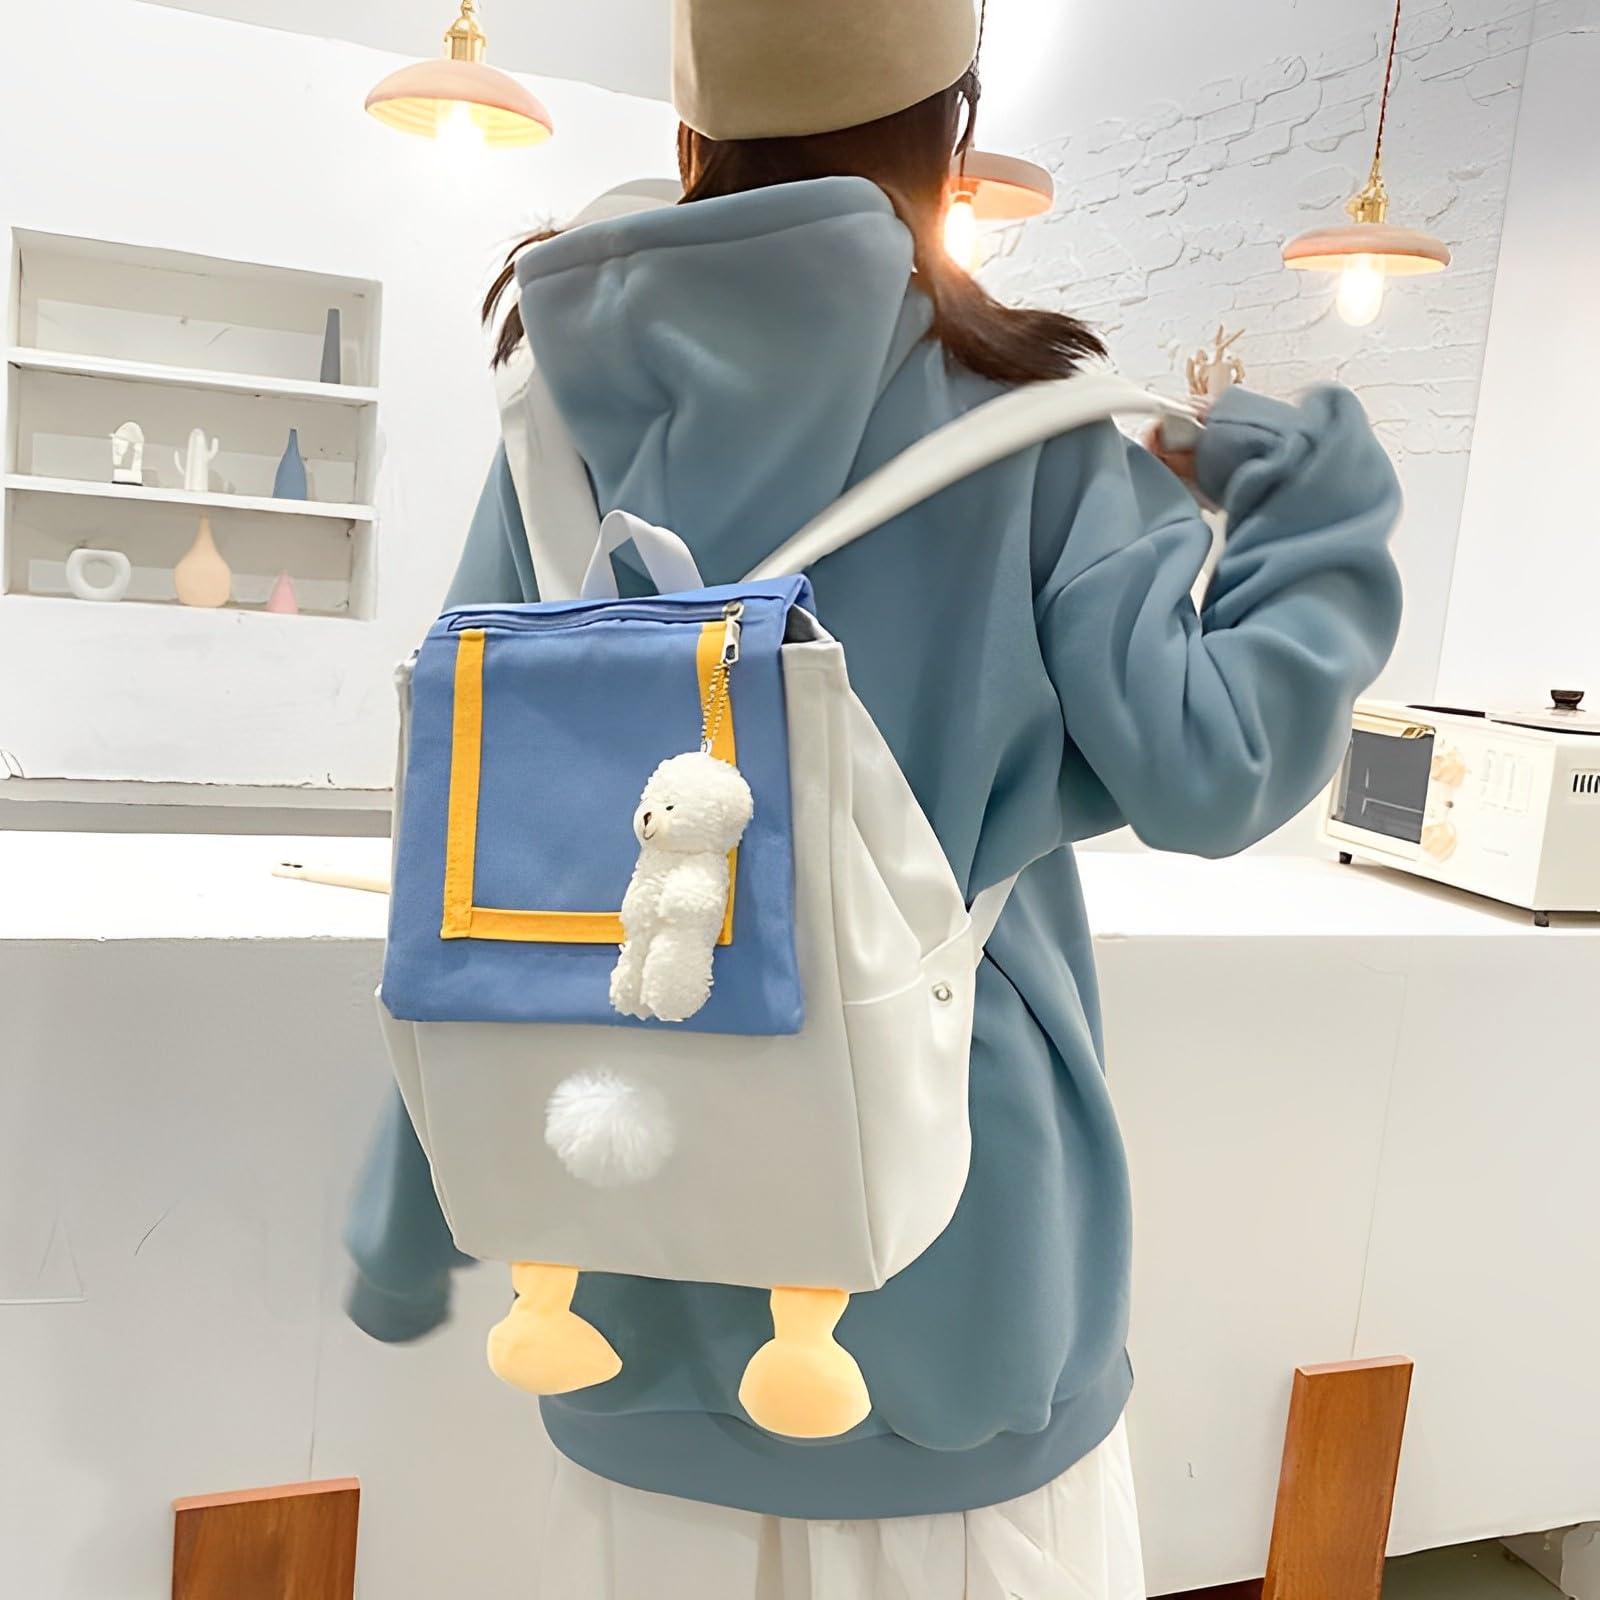 ooibnn Kawaii Backpack With Cute Accessory WithAnti-thief Pocket Pins Blue And Yellow Cute Duck Lightweight Laptop Bag